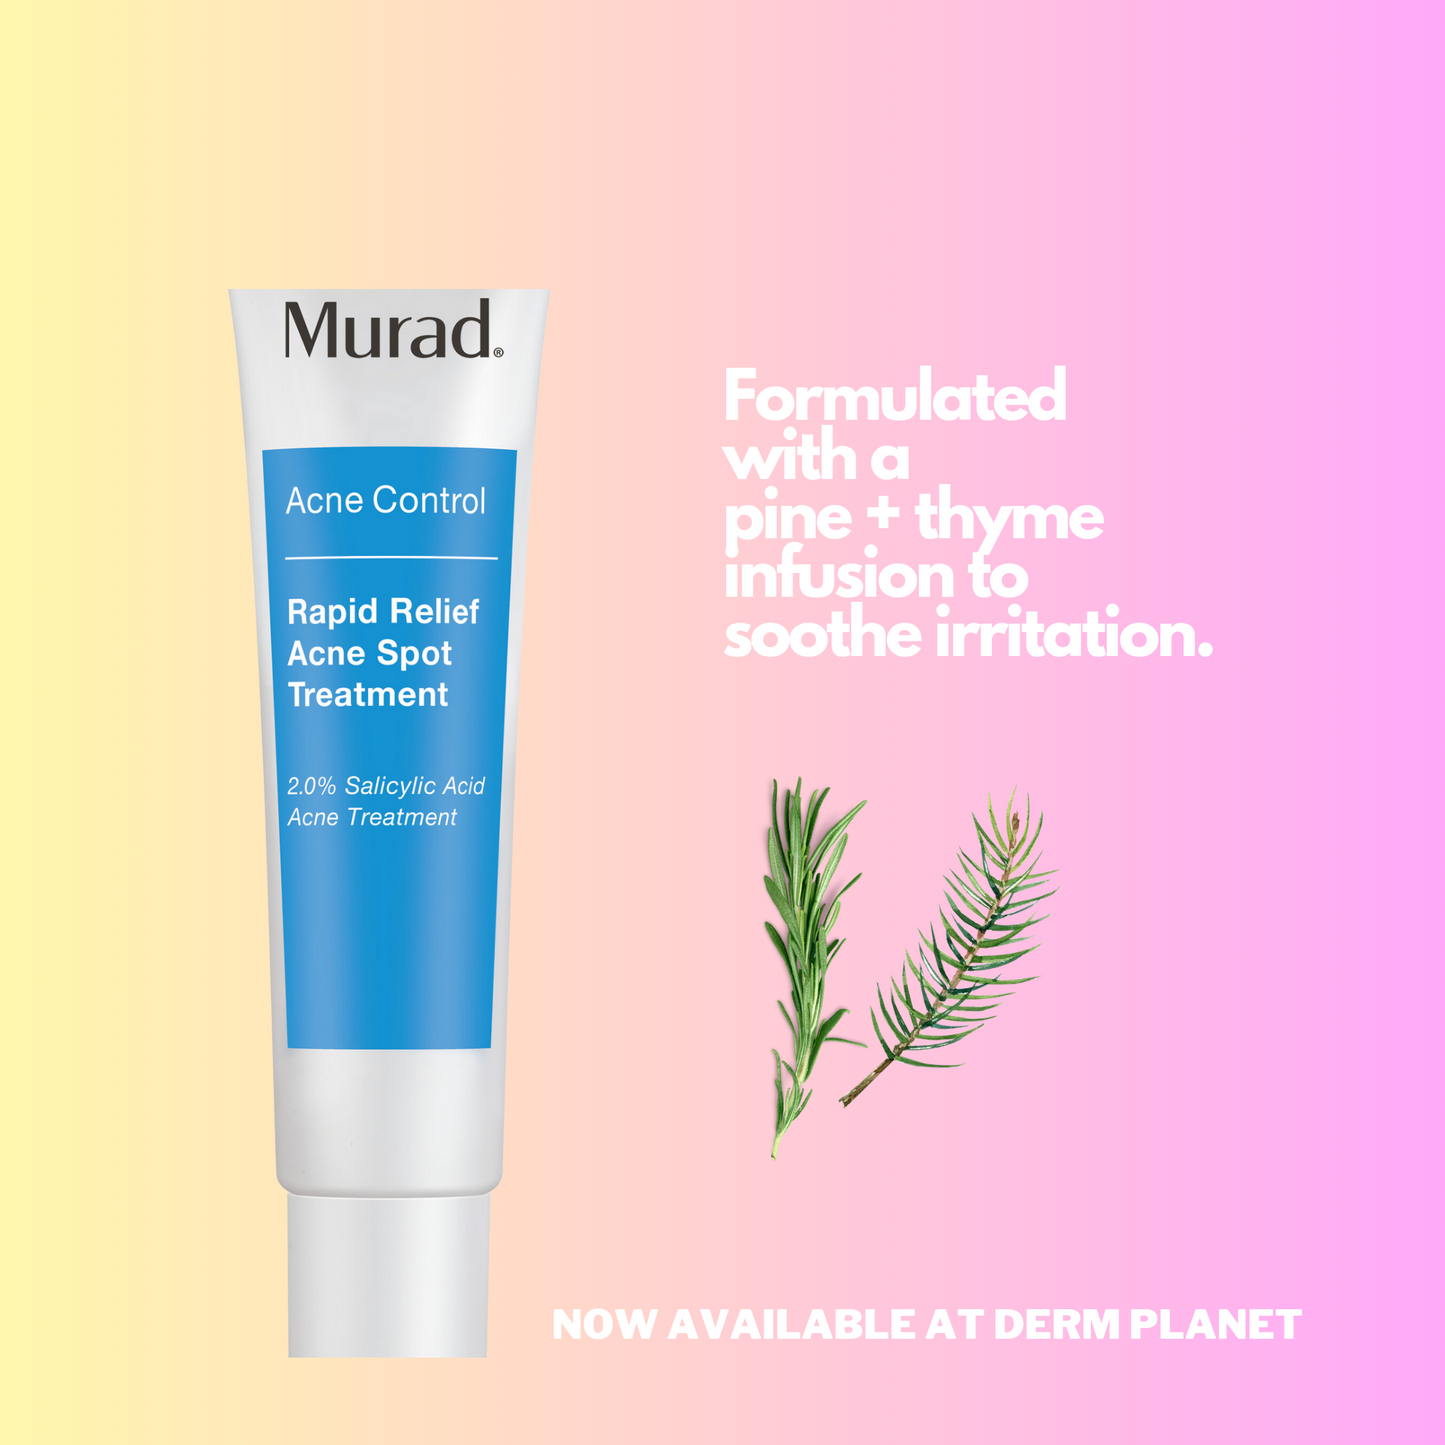 The Murad Acne Relief Spot Treatment is formulated with a pine + thyme to sooth irritation.